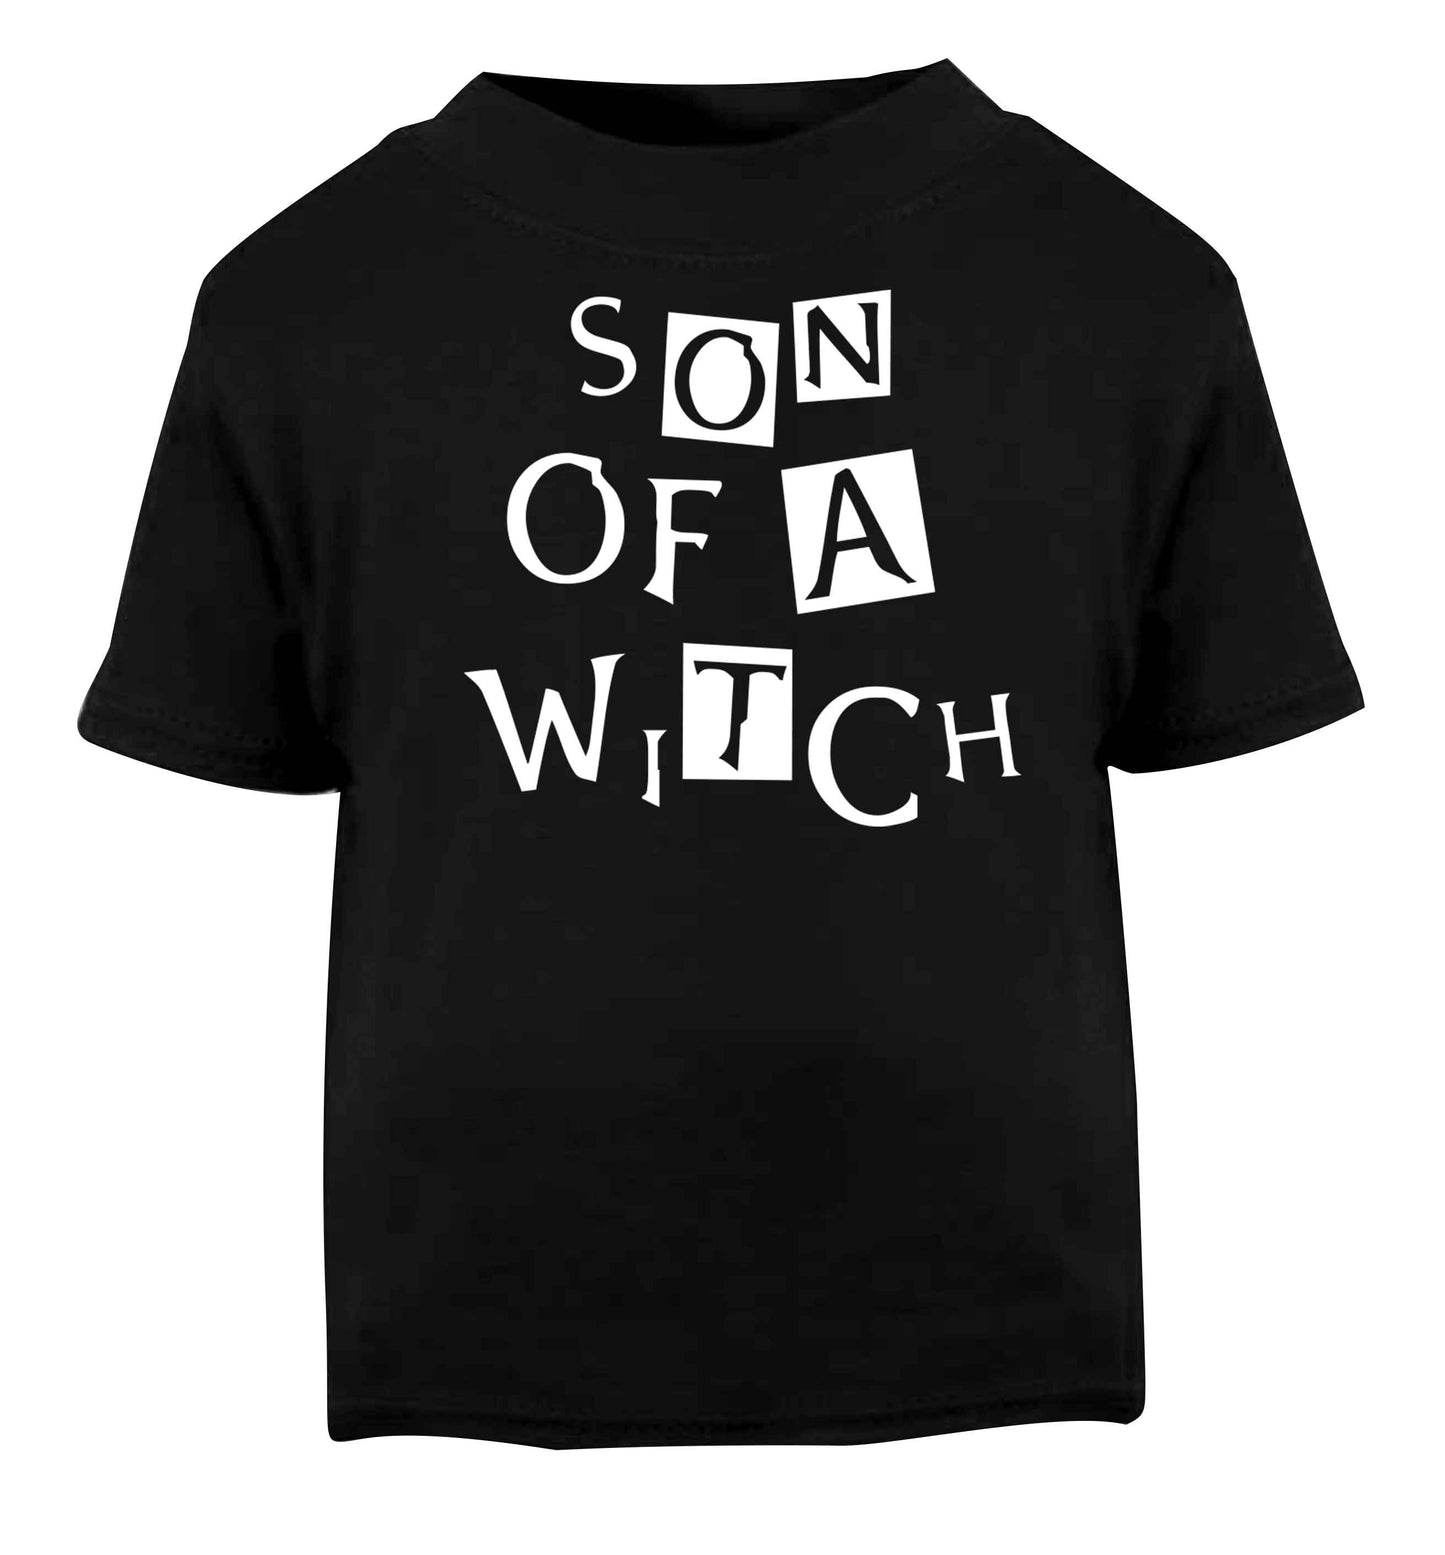 Son of a witch Black baby toddler Tshirt 2 years